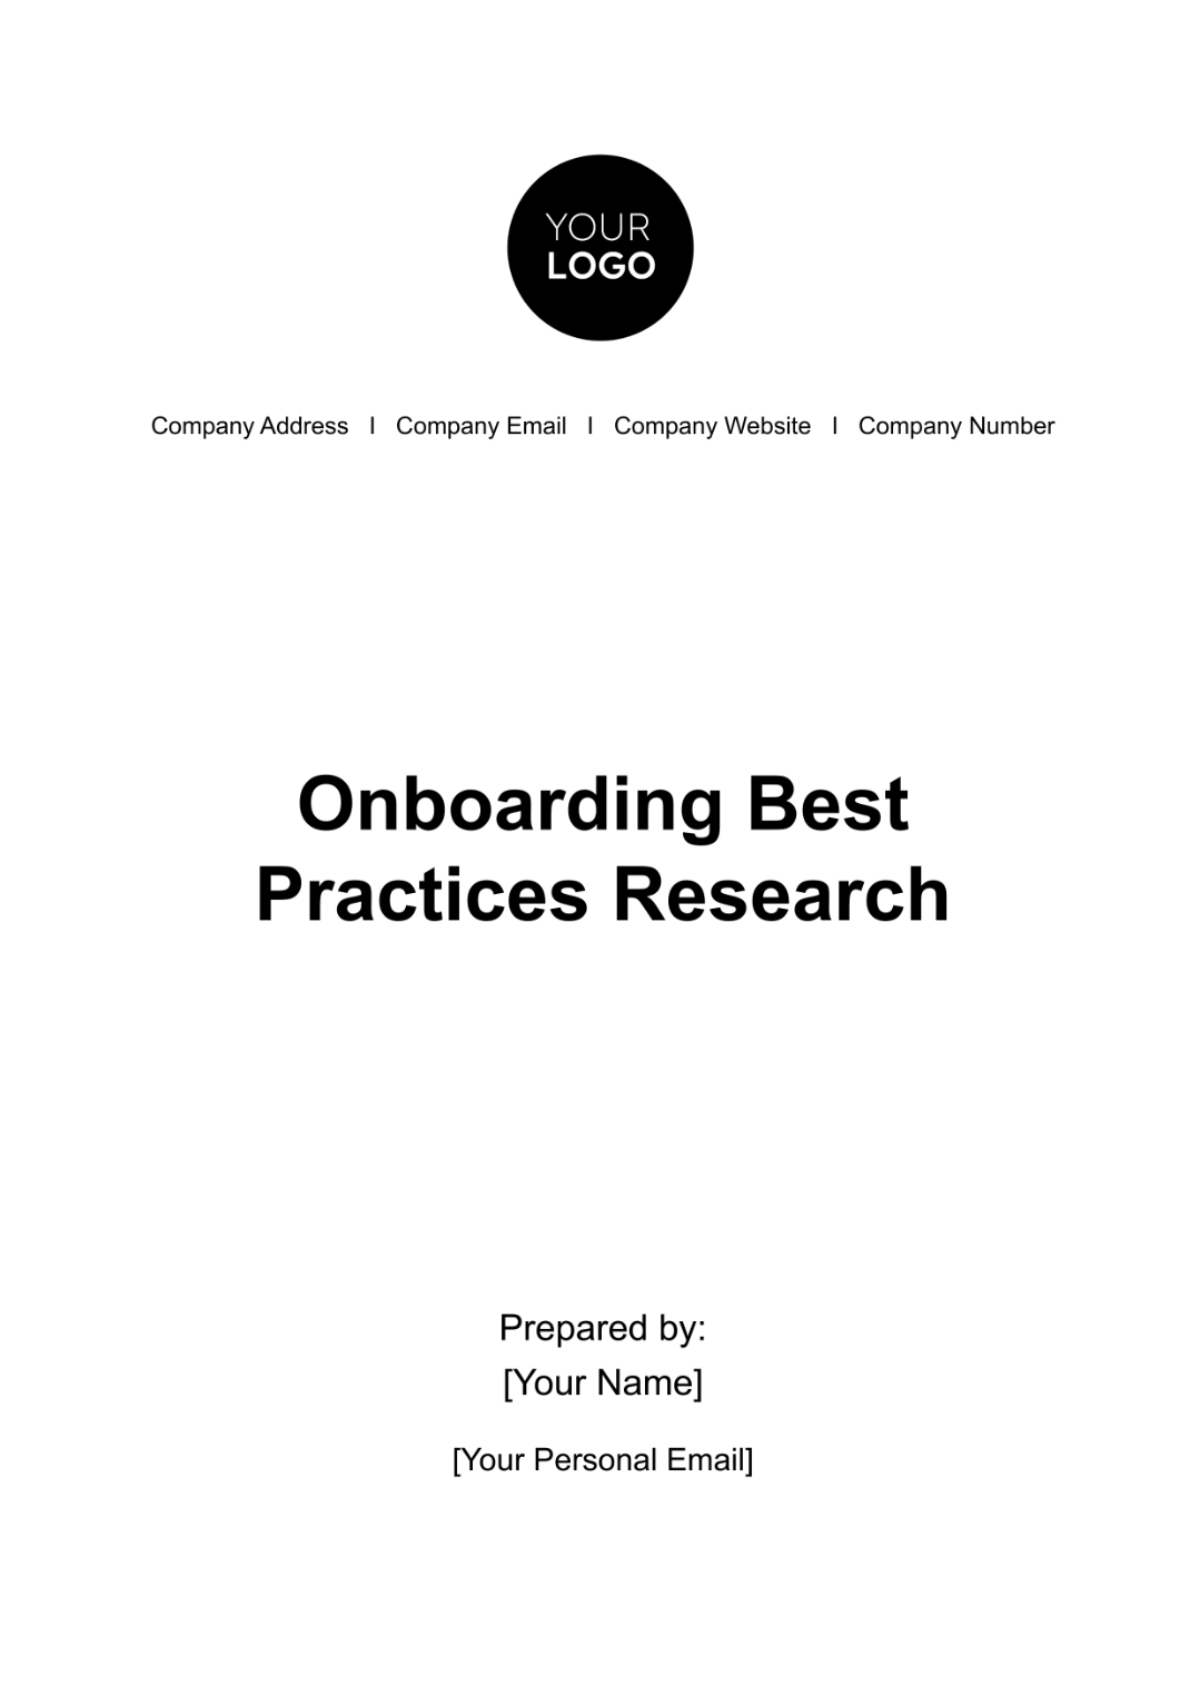 Onboarding Best Practices Research HR Template